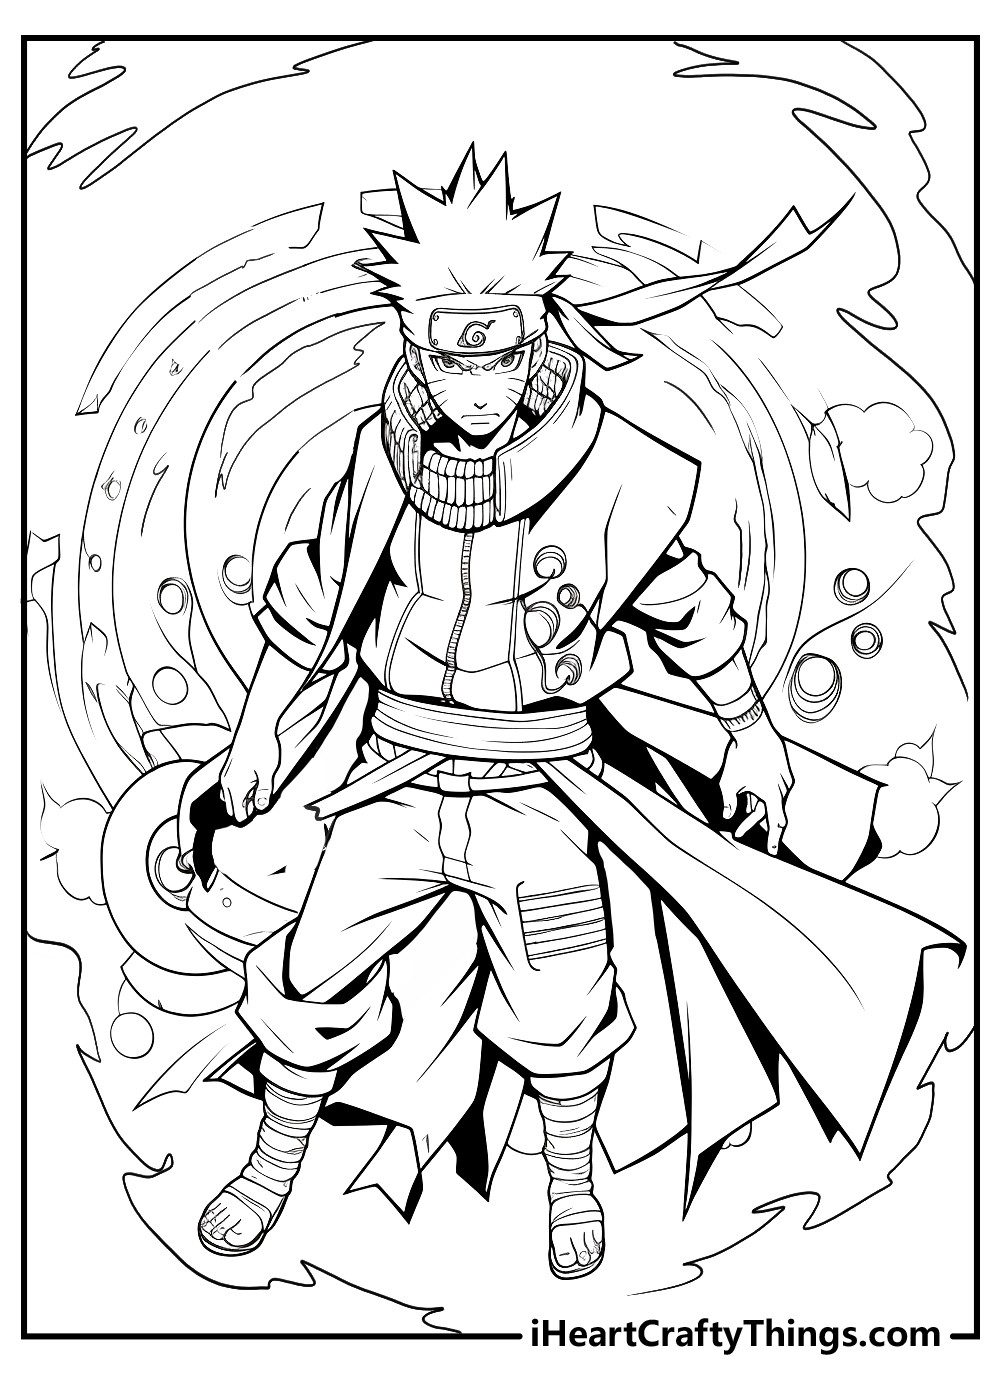 Printable naruto coloring pages updated